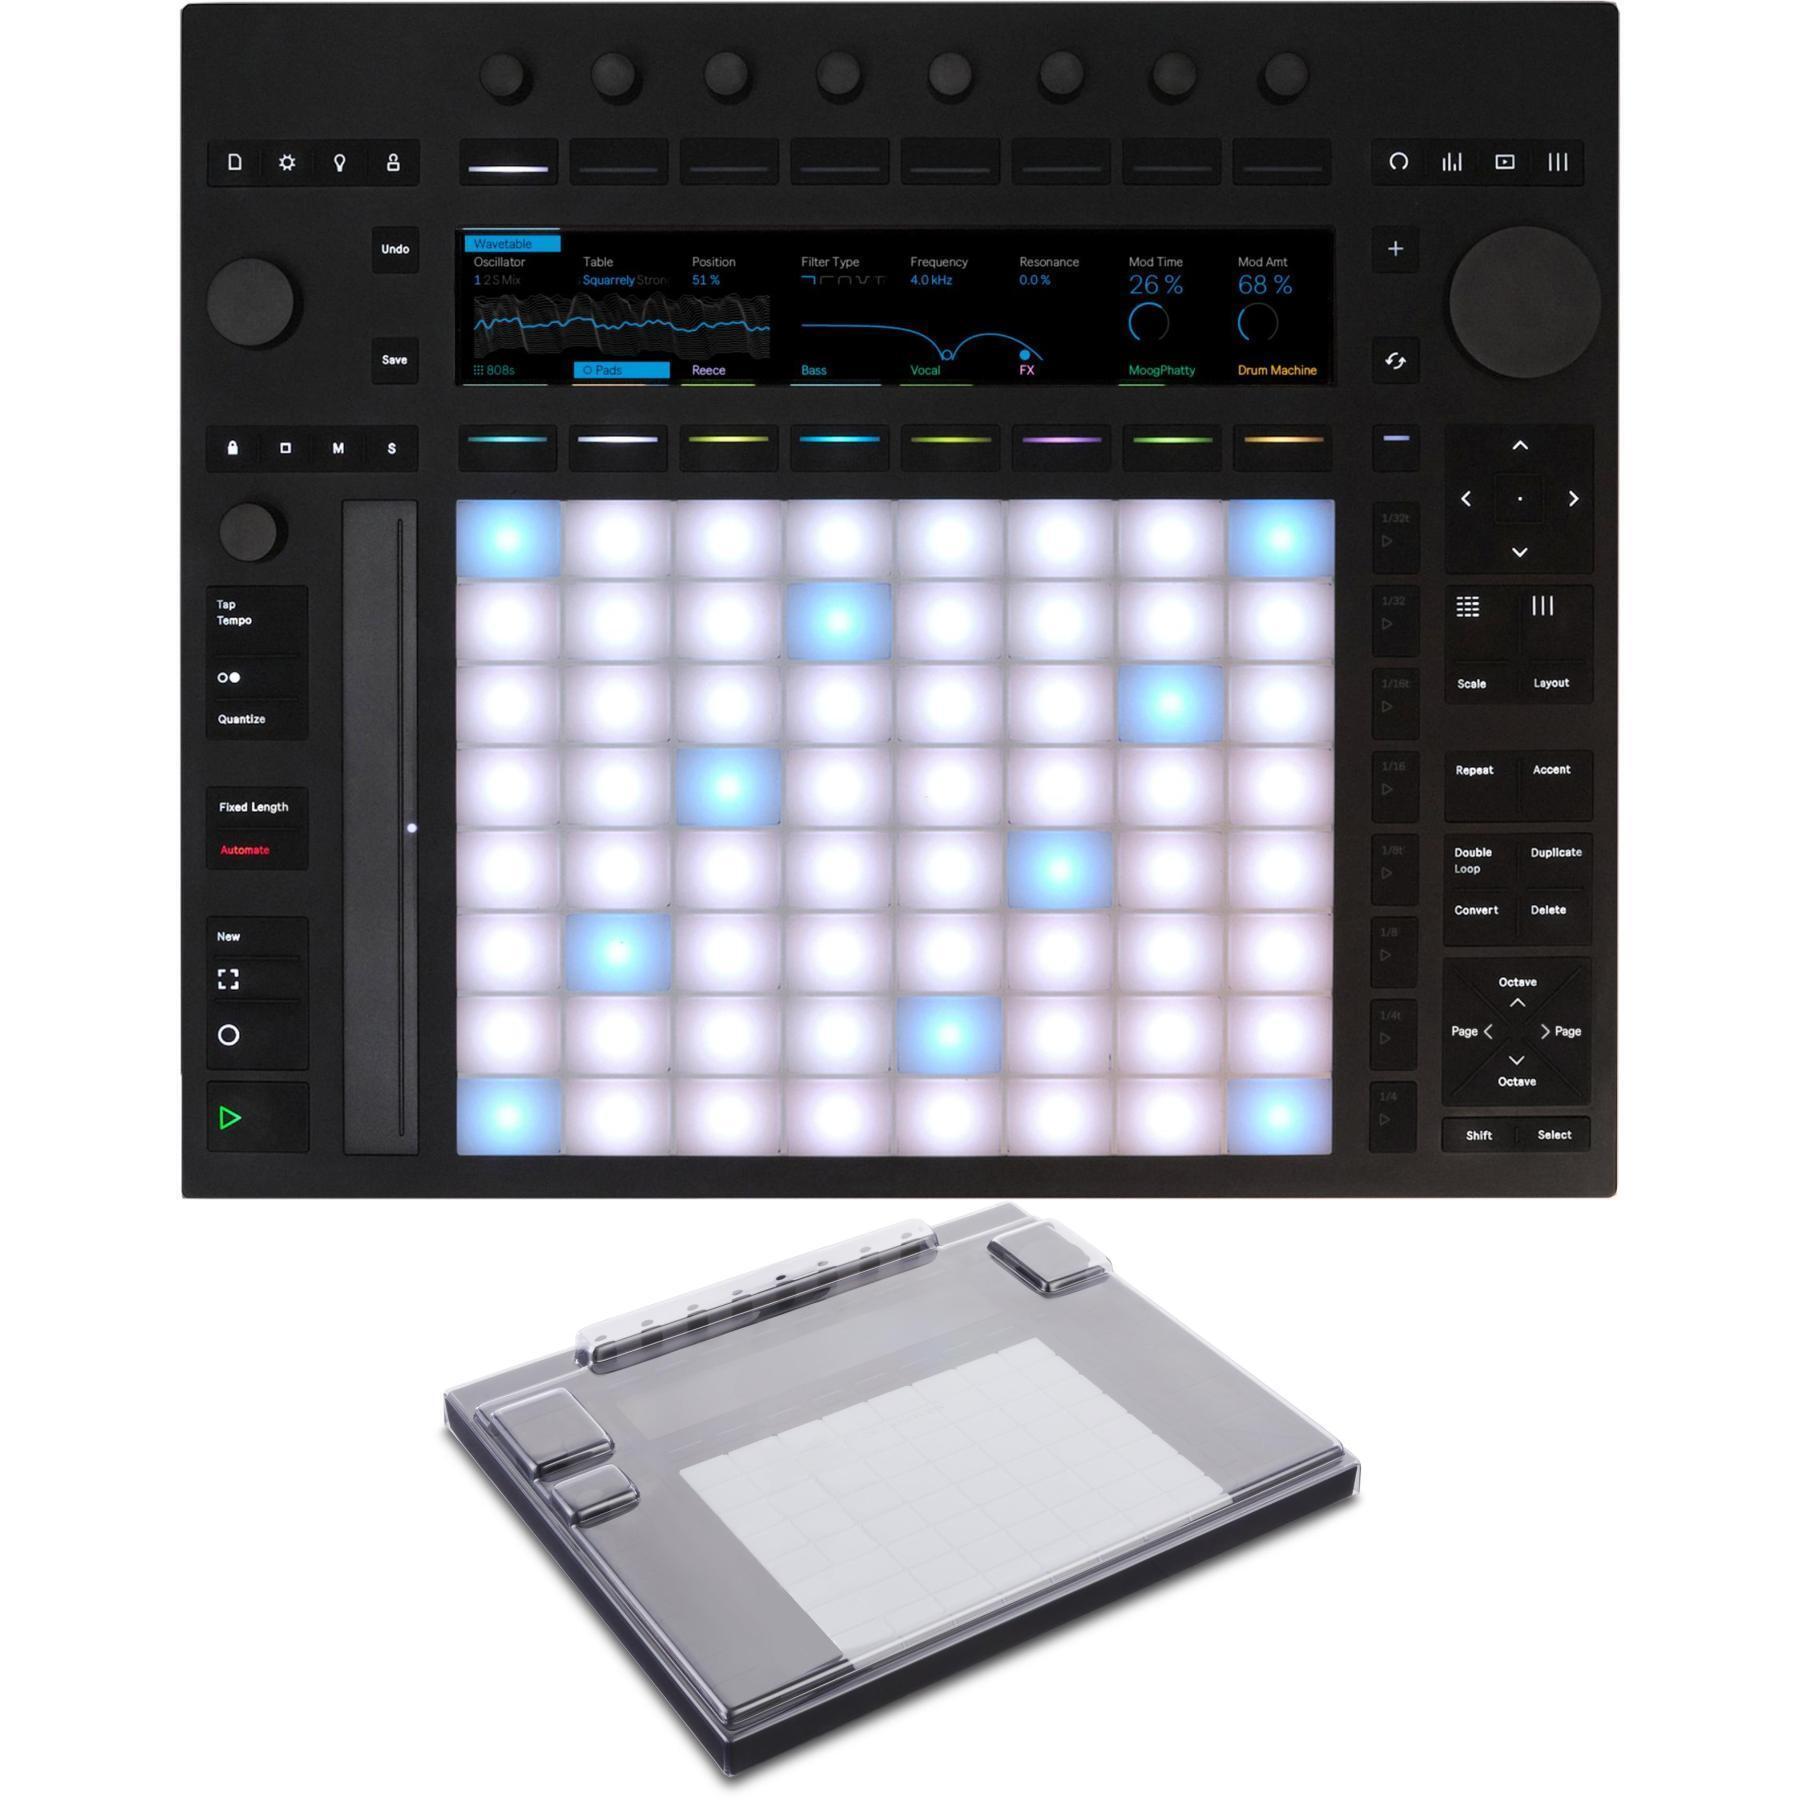 Ableton Push 3 Standalone | Sweetwater